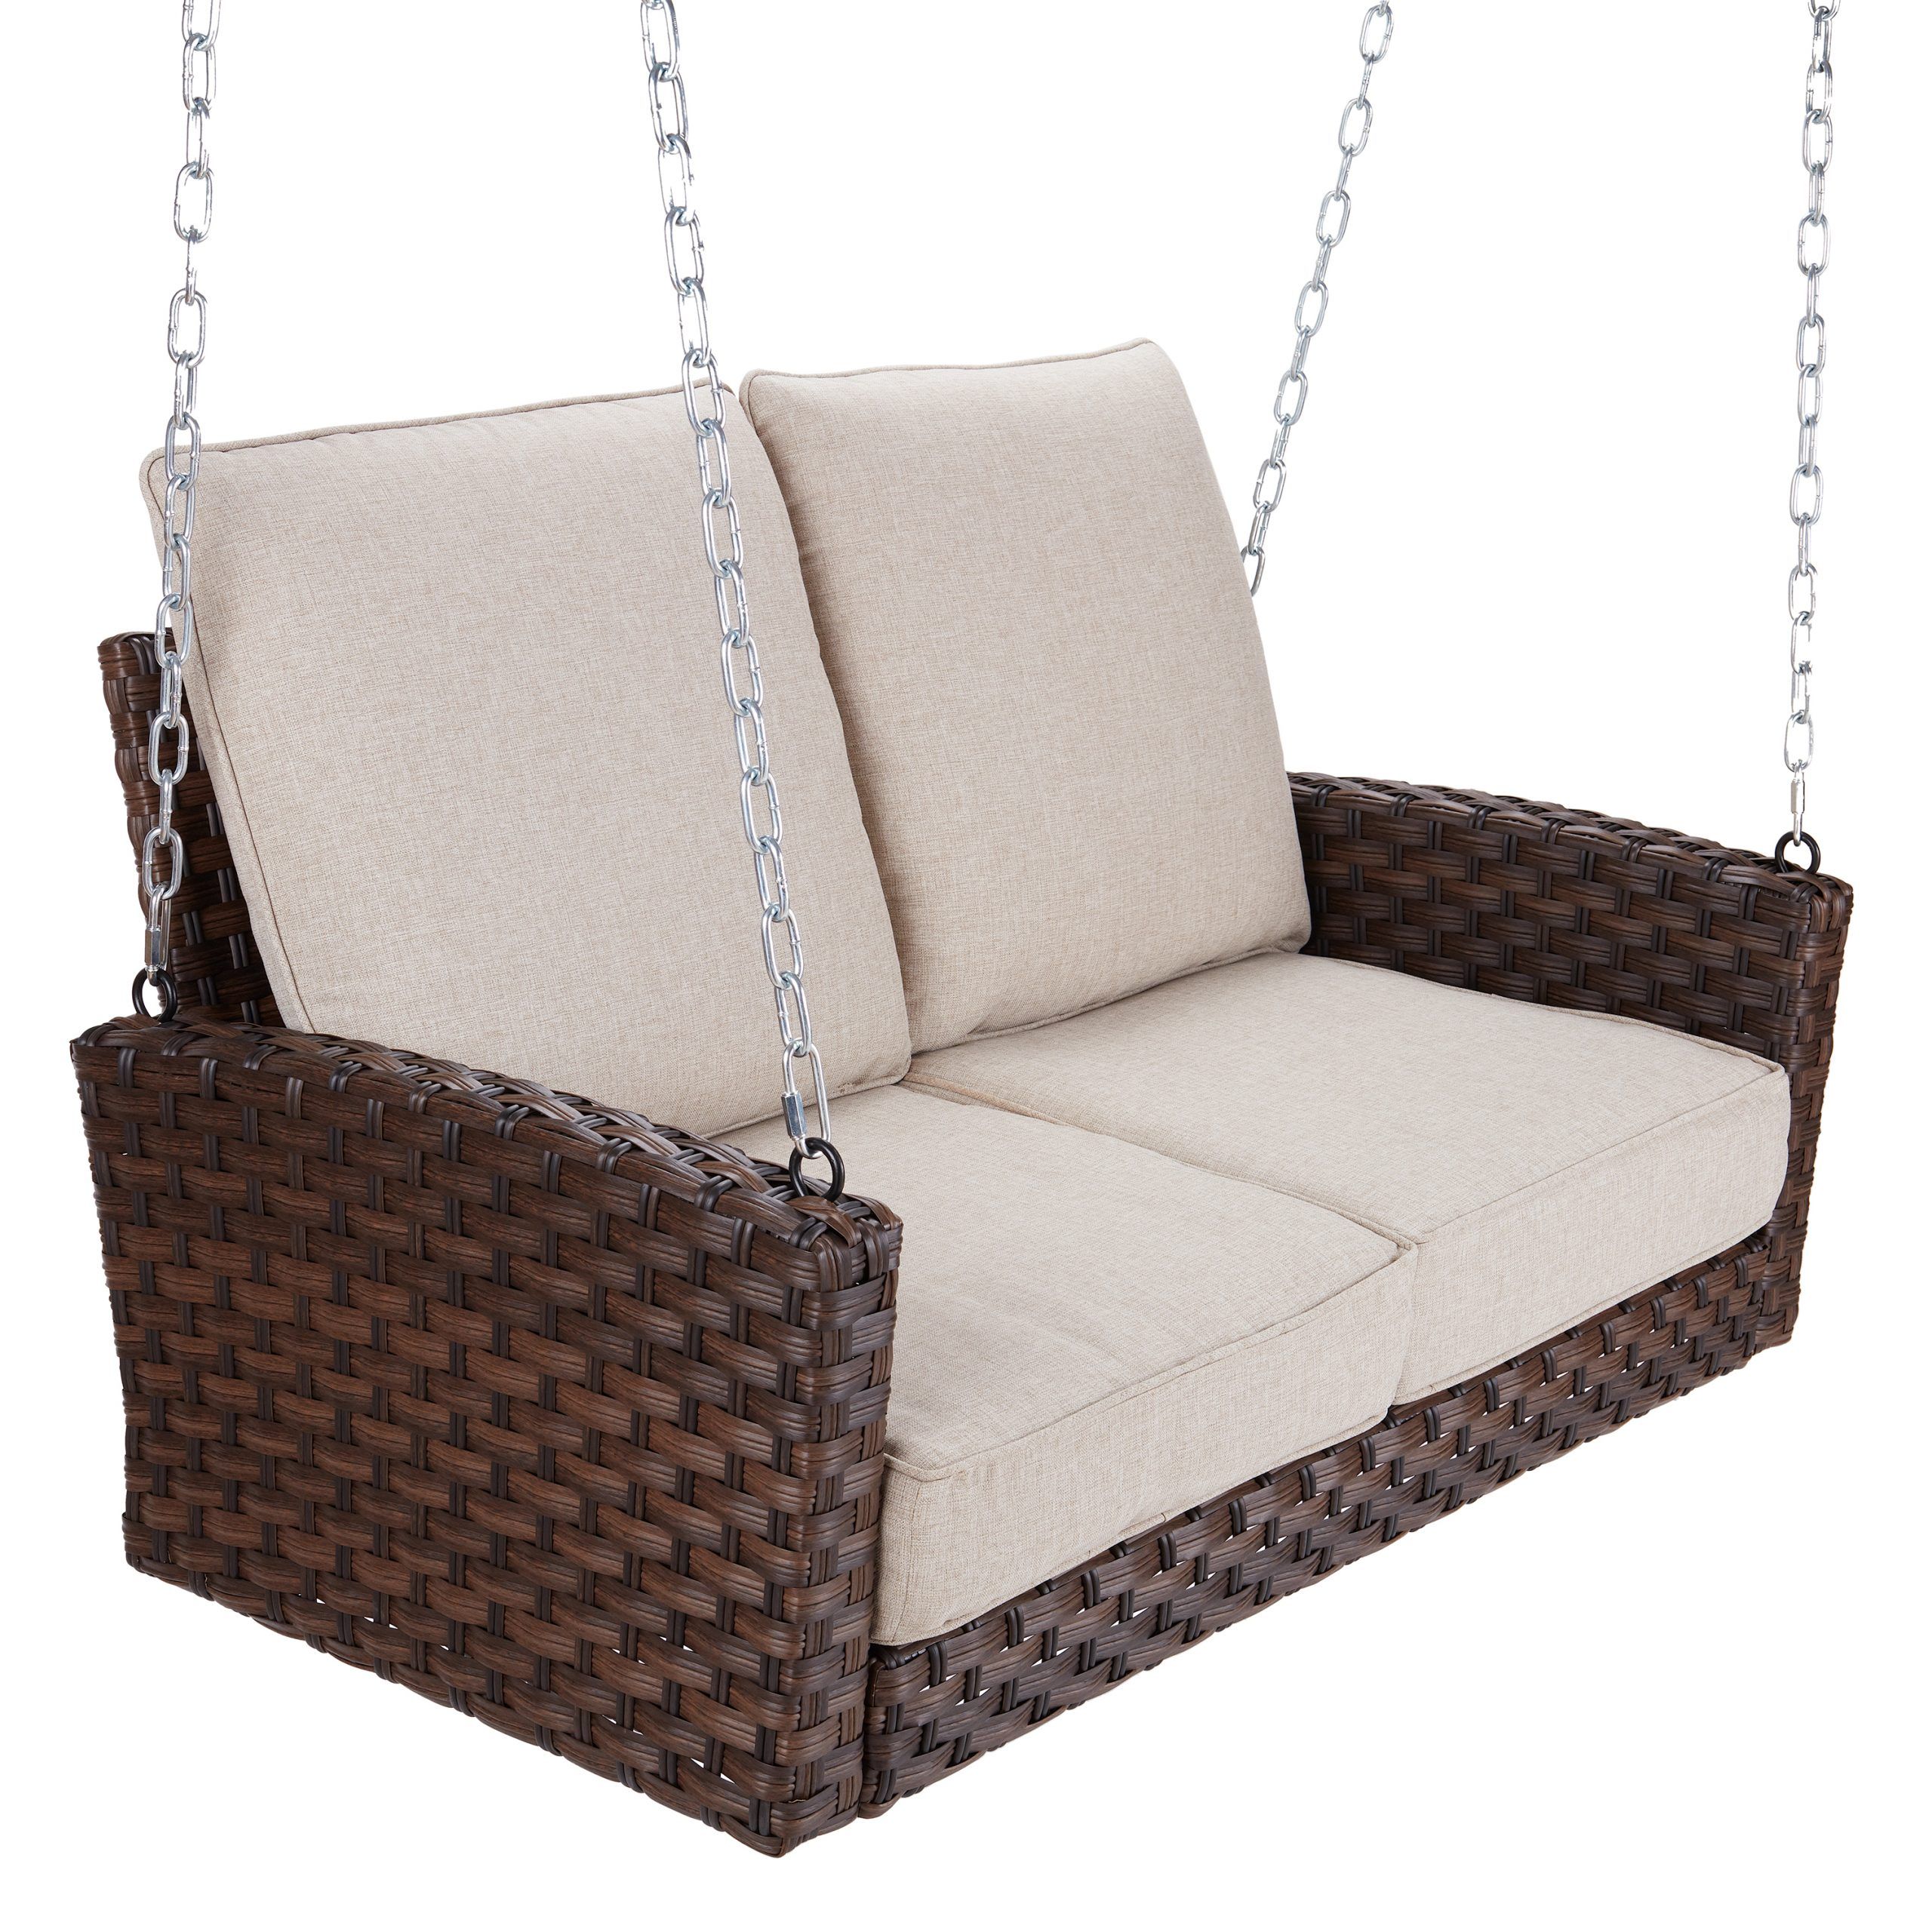 Well Liked 2 Person Outdoor Convertible Canopy Swing Gliders With Removable Cushions Beige Throughout Better Homes & Gardens Hensley Outdoor Wicker Porch Swing (View 14 of 25)